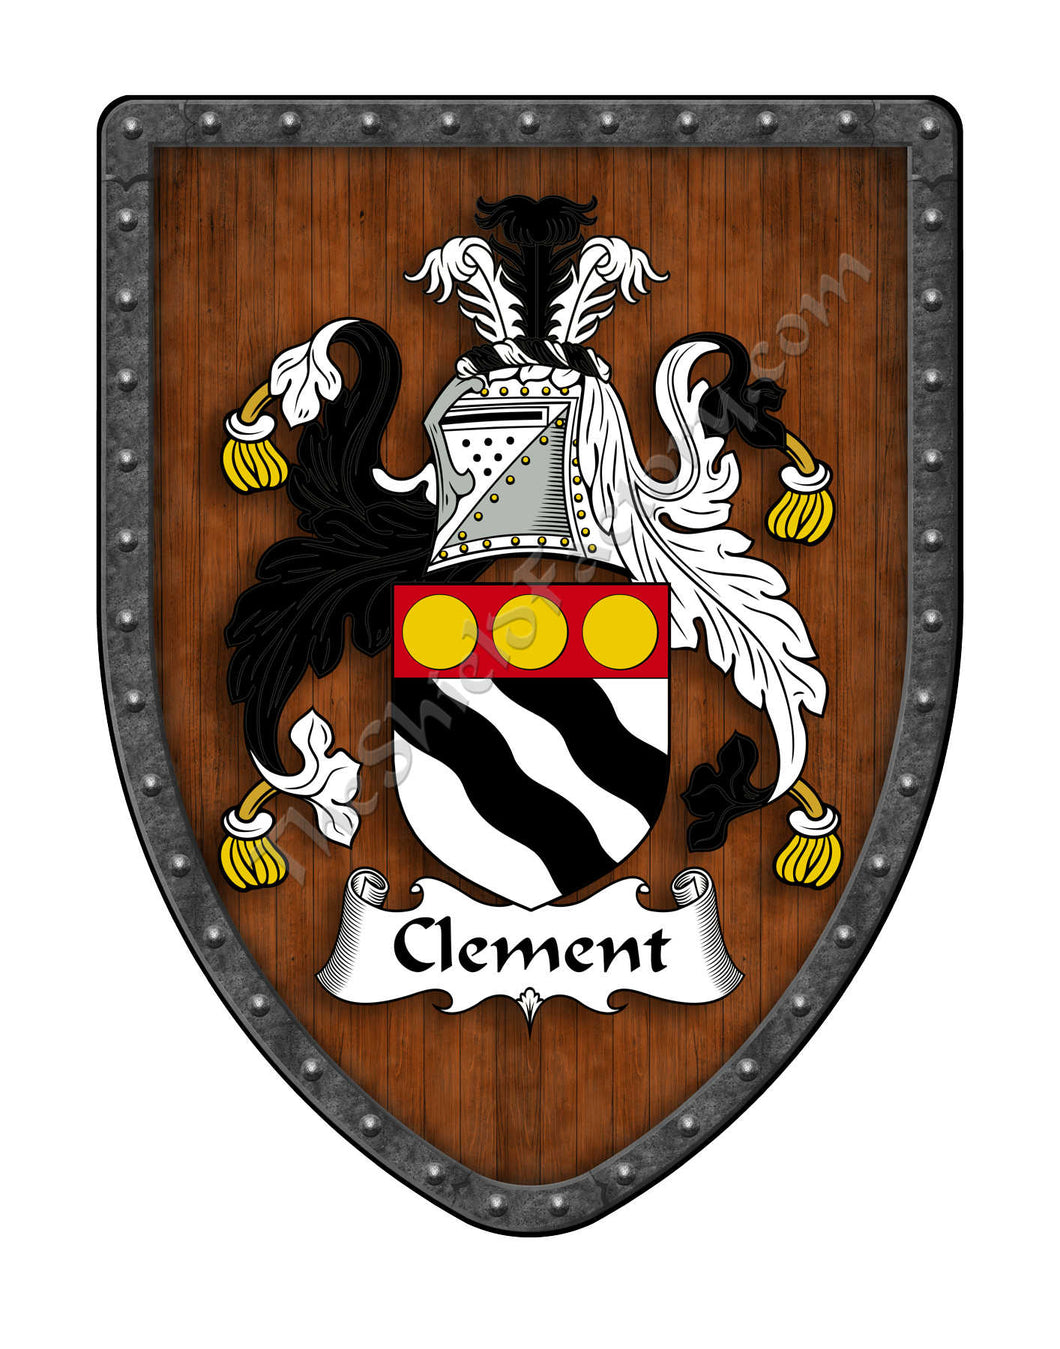 Clement Coat of Arms Shield Family Crest